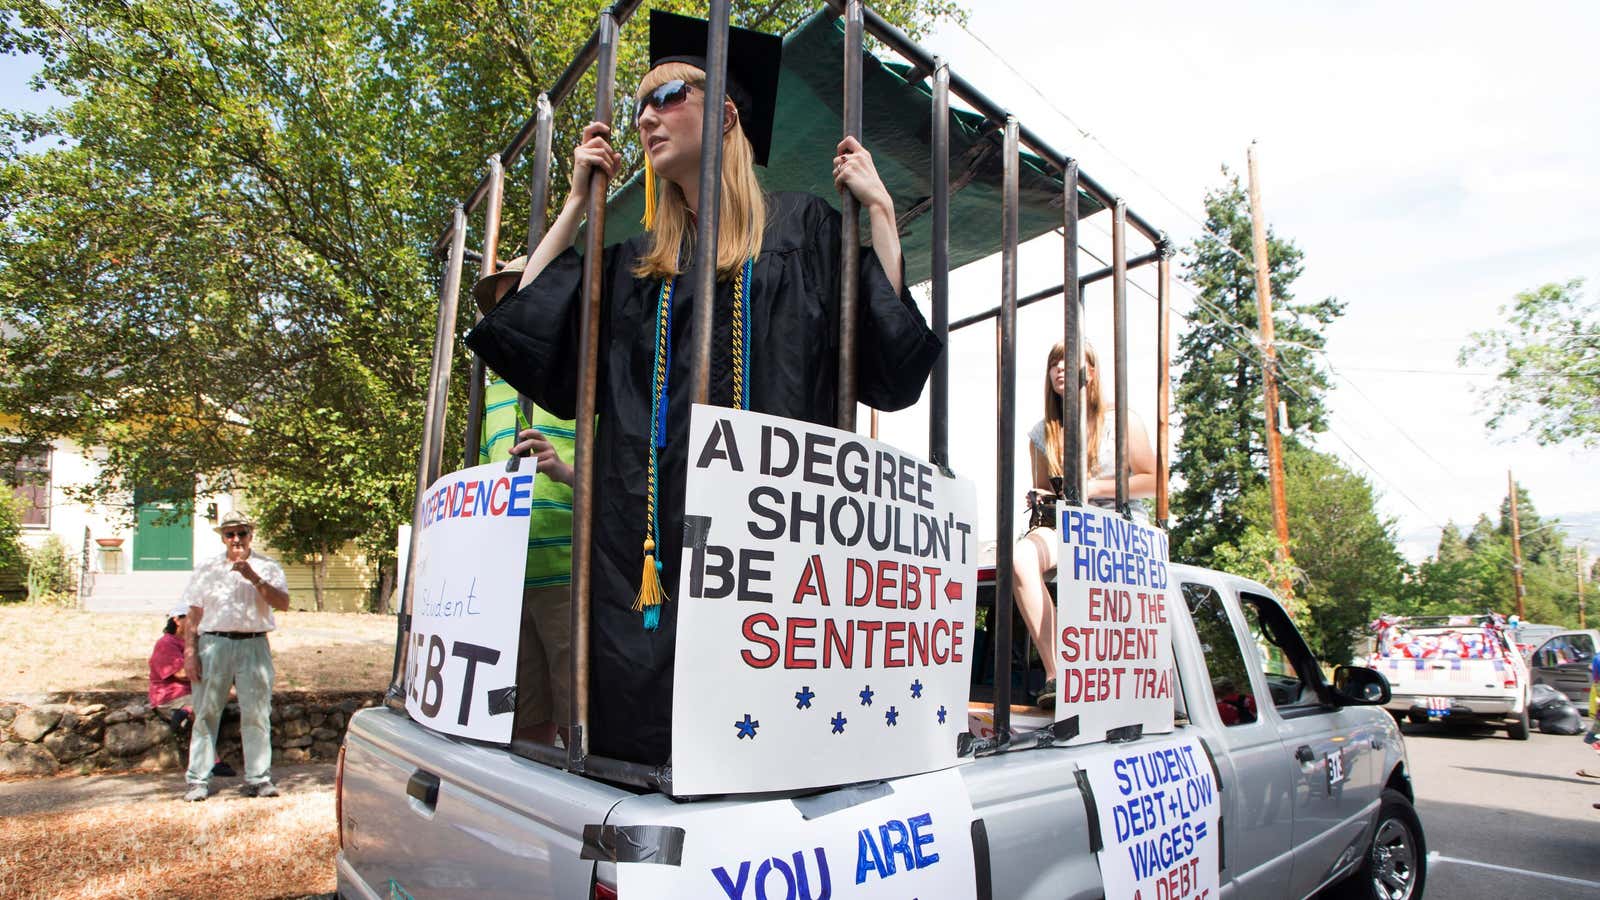 Parade participants protesting against high student loan burdens